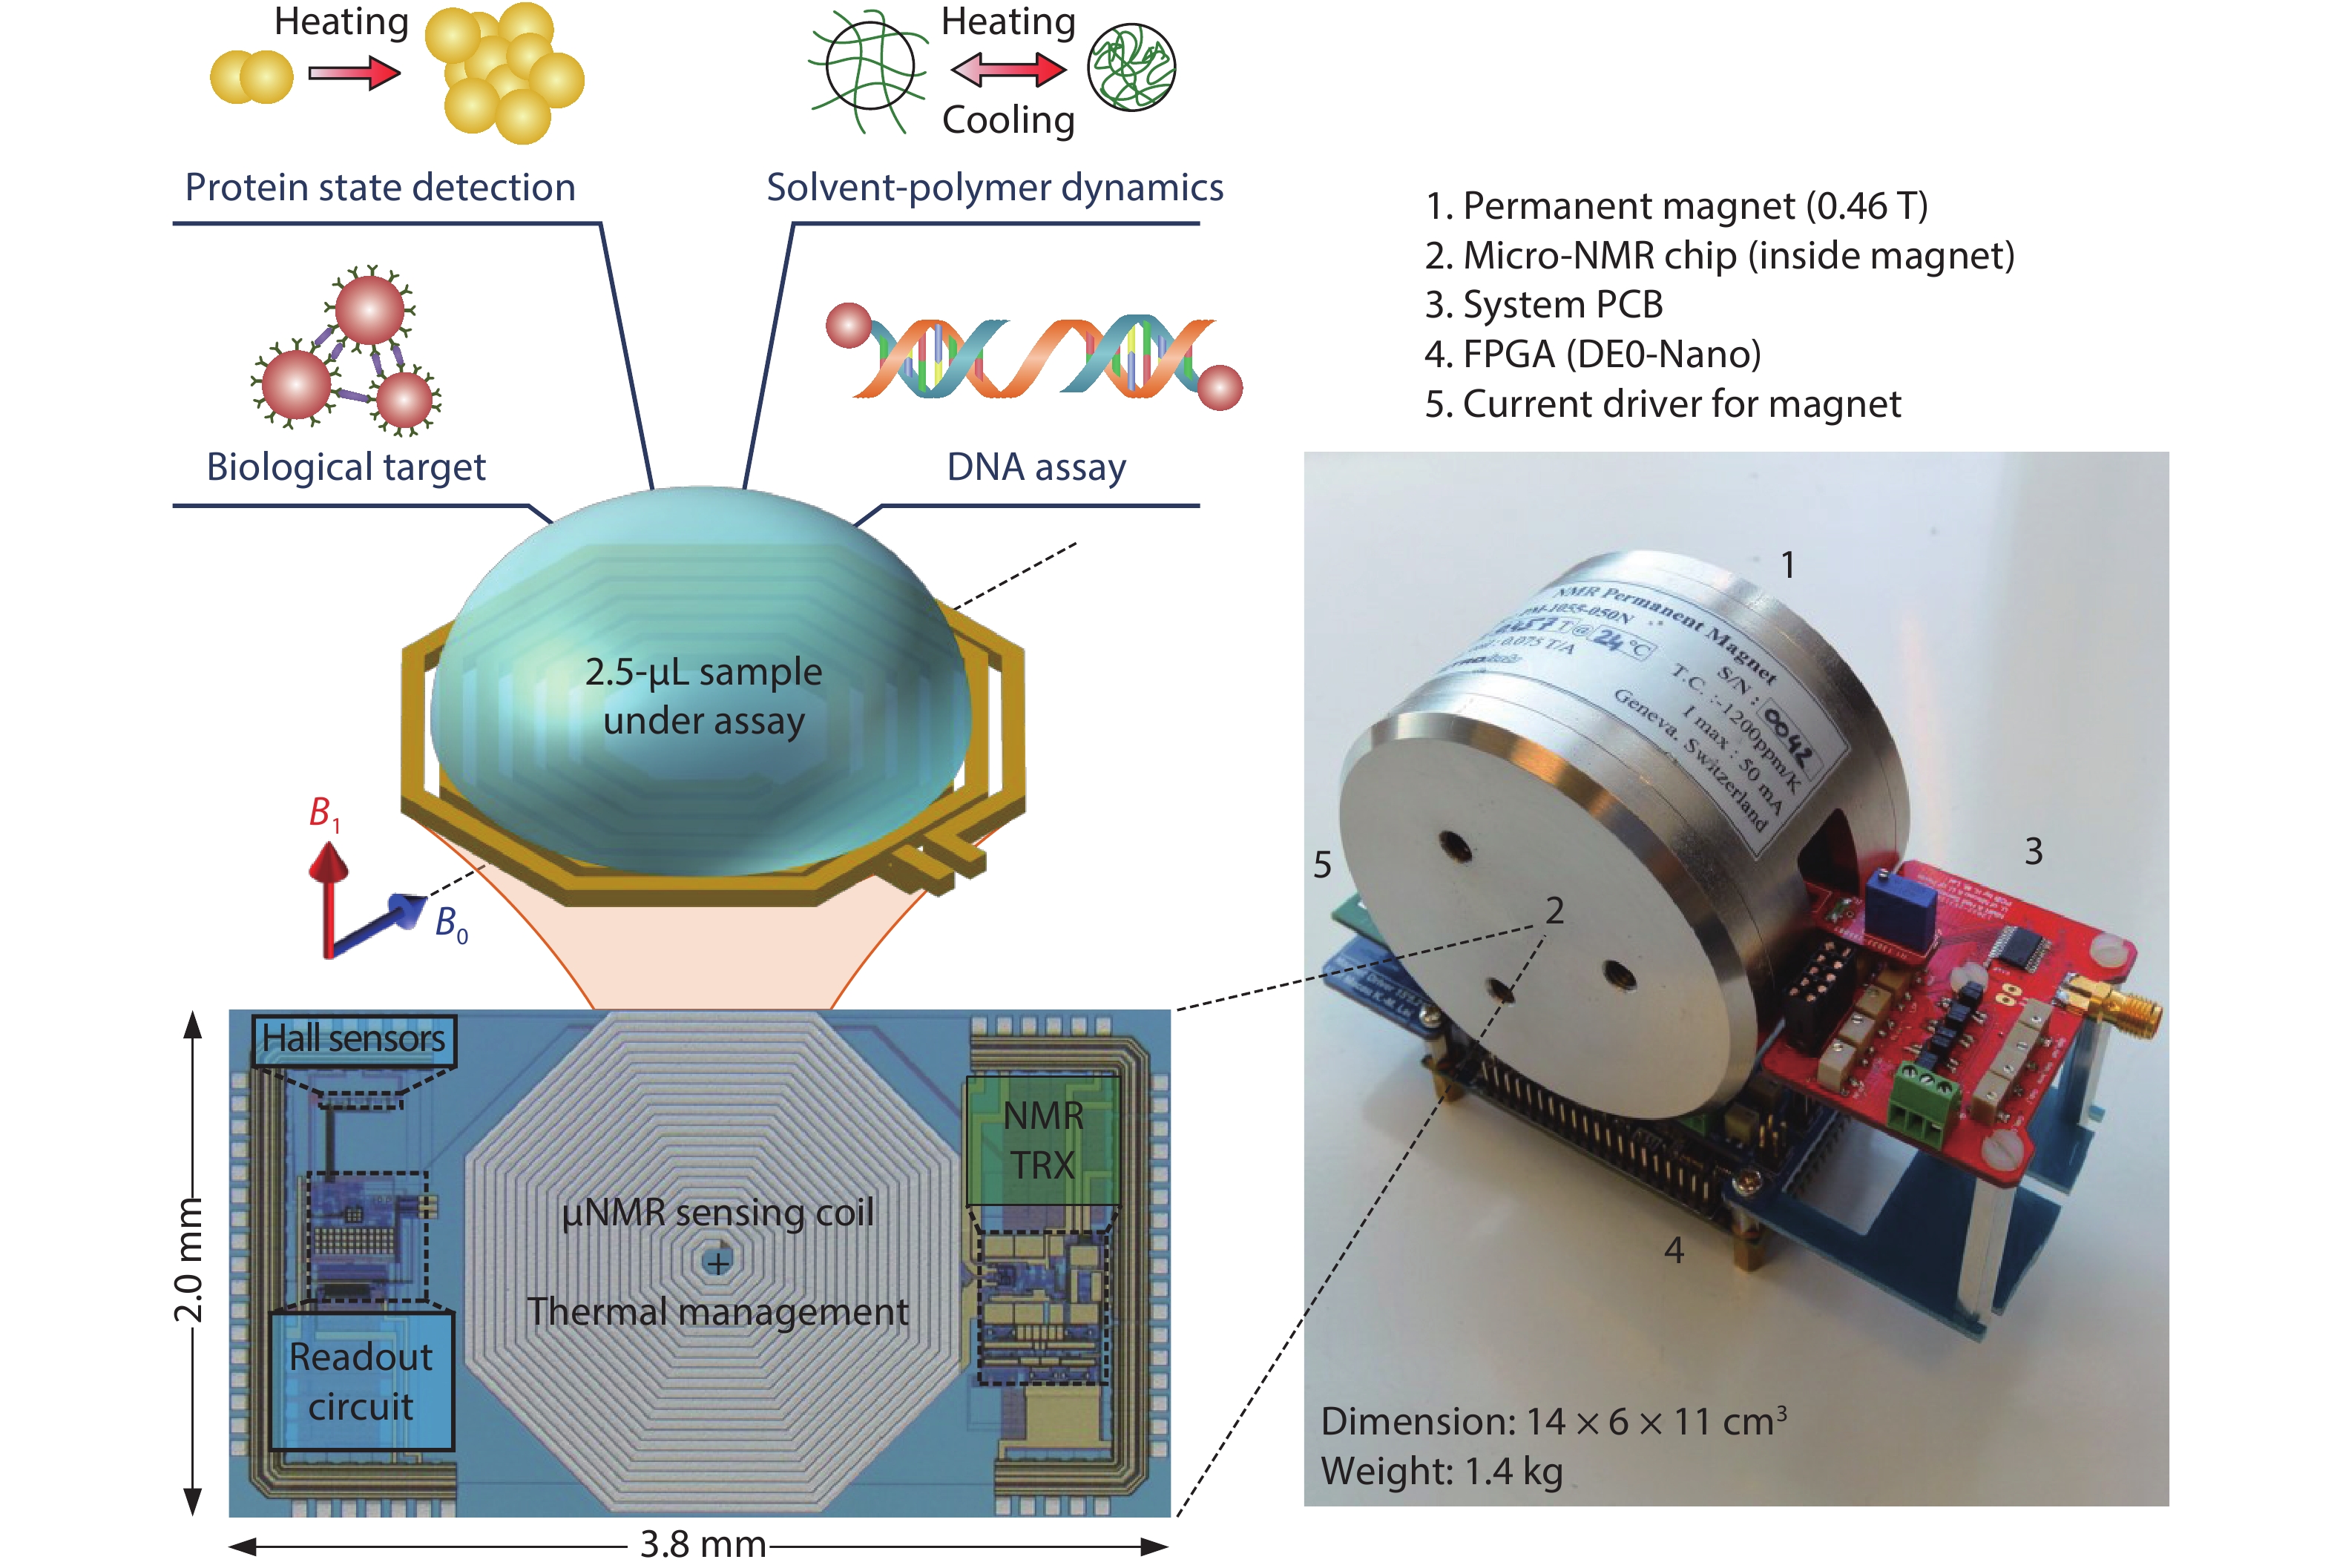 (Color online) A handheld NMR CMOS platform: (left) chip photo and its applications for multi-type assays, and (right) platform assembly. Courtesy K.M. Lei ISSCC 2016.